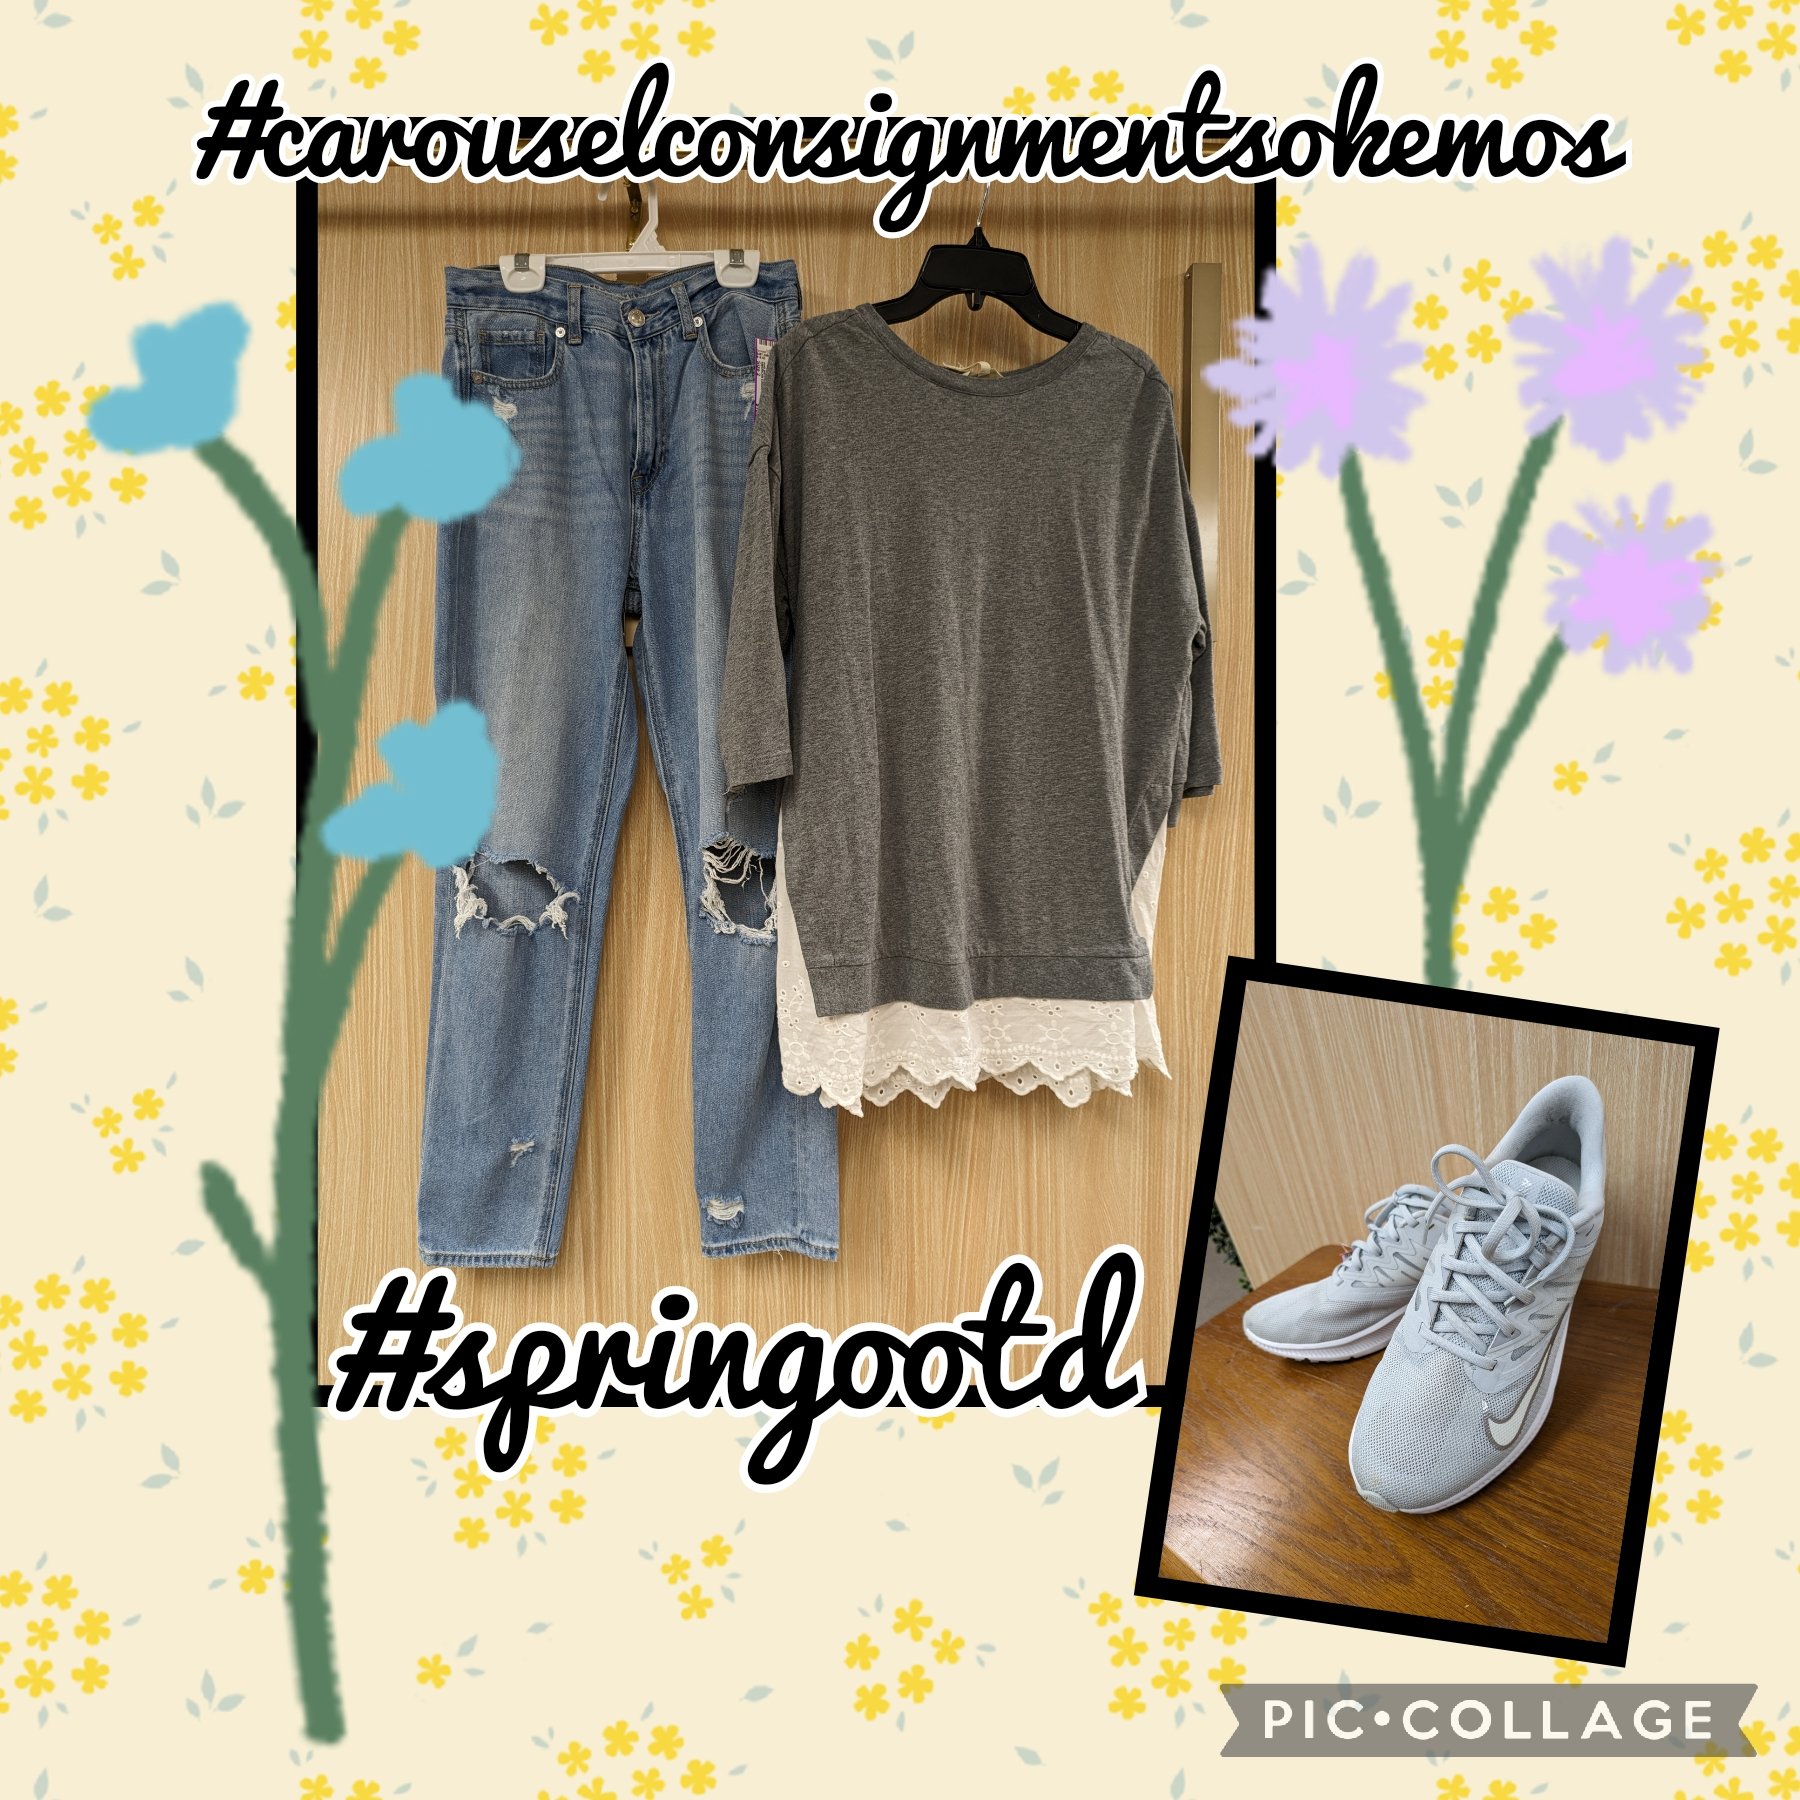 🩵For Matilda Jane Fans🩵
Matilda Jane Top Size Small $27
American Eagle Boyfriend Jeans Size 2 $16
Nike sneakers Size 7 $25
#carouselconsignmentsokemos #shoplocal #shopsmall #shopsmallbusiness #resalenotretail #shopconsignment #shopsecondhand #prelo